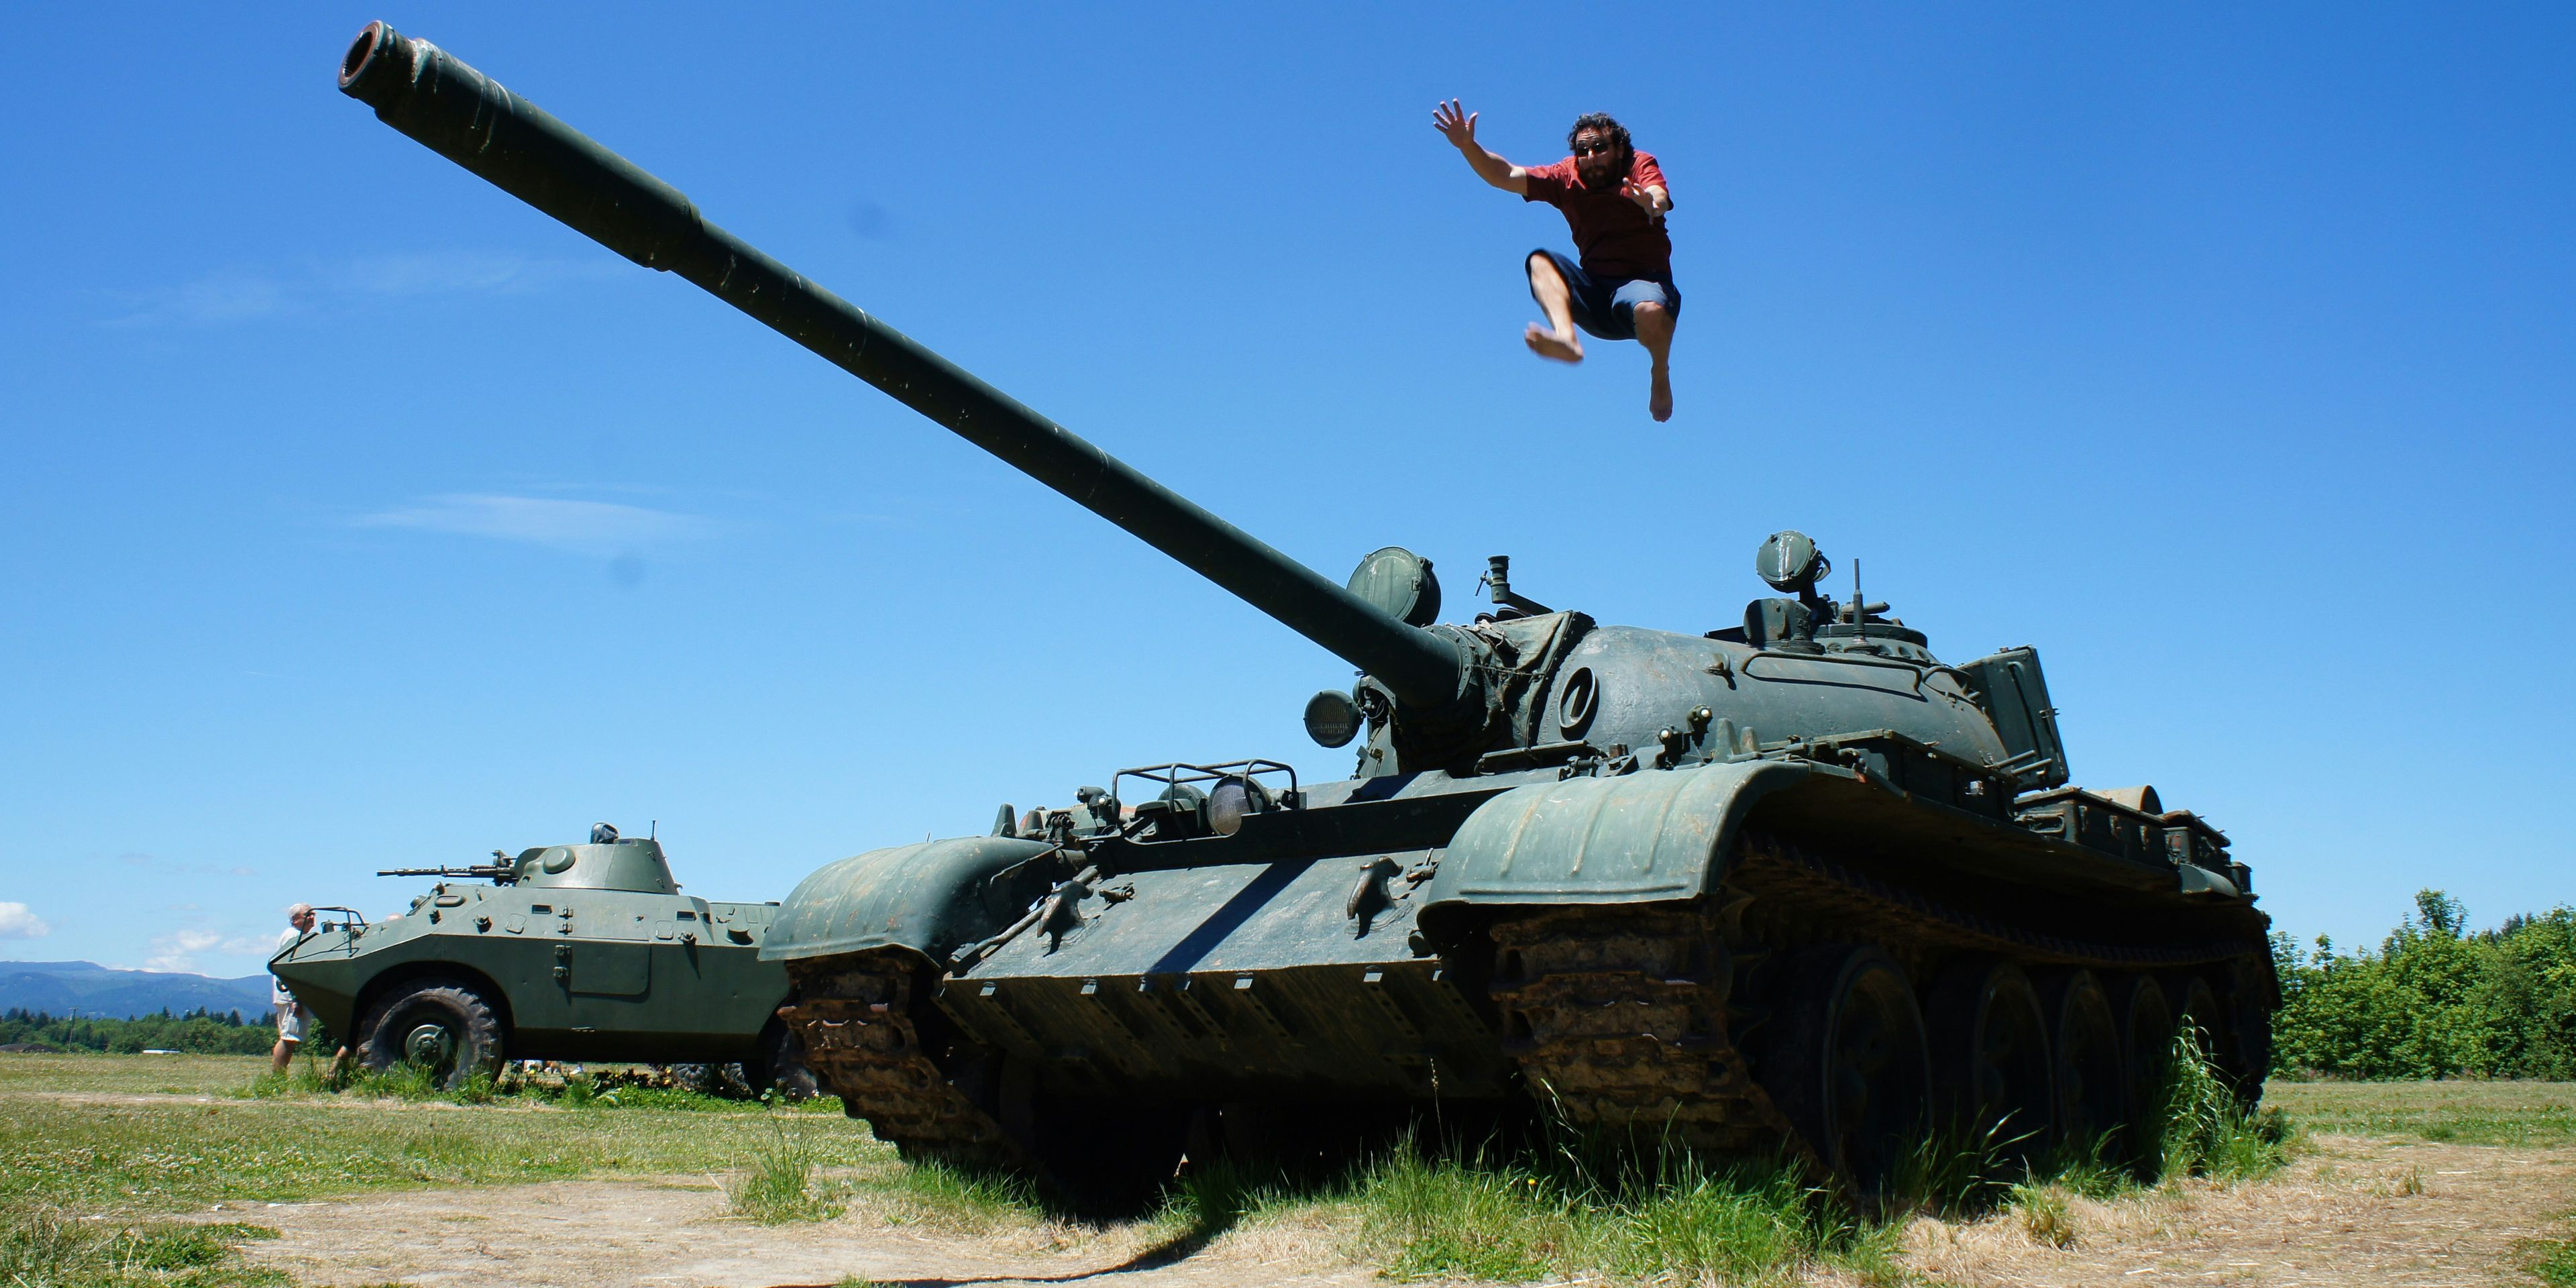 a man is jumping in the air in front of a tank .